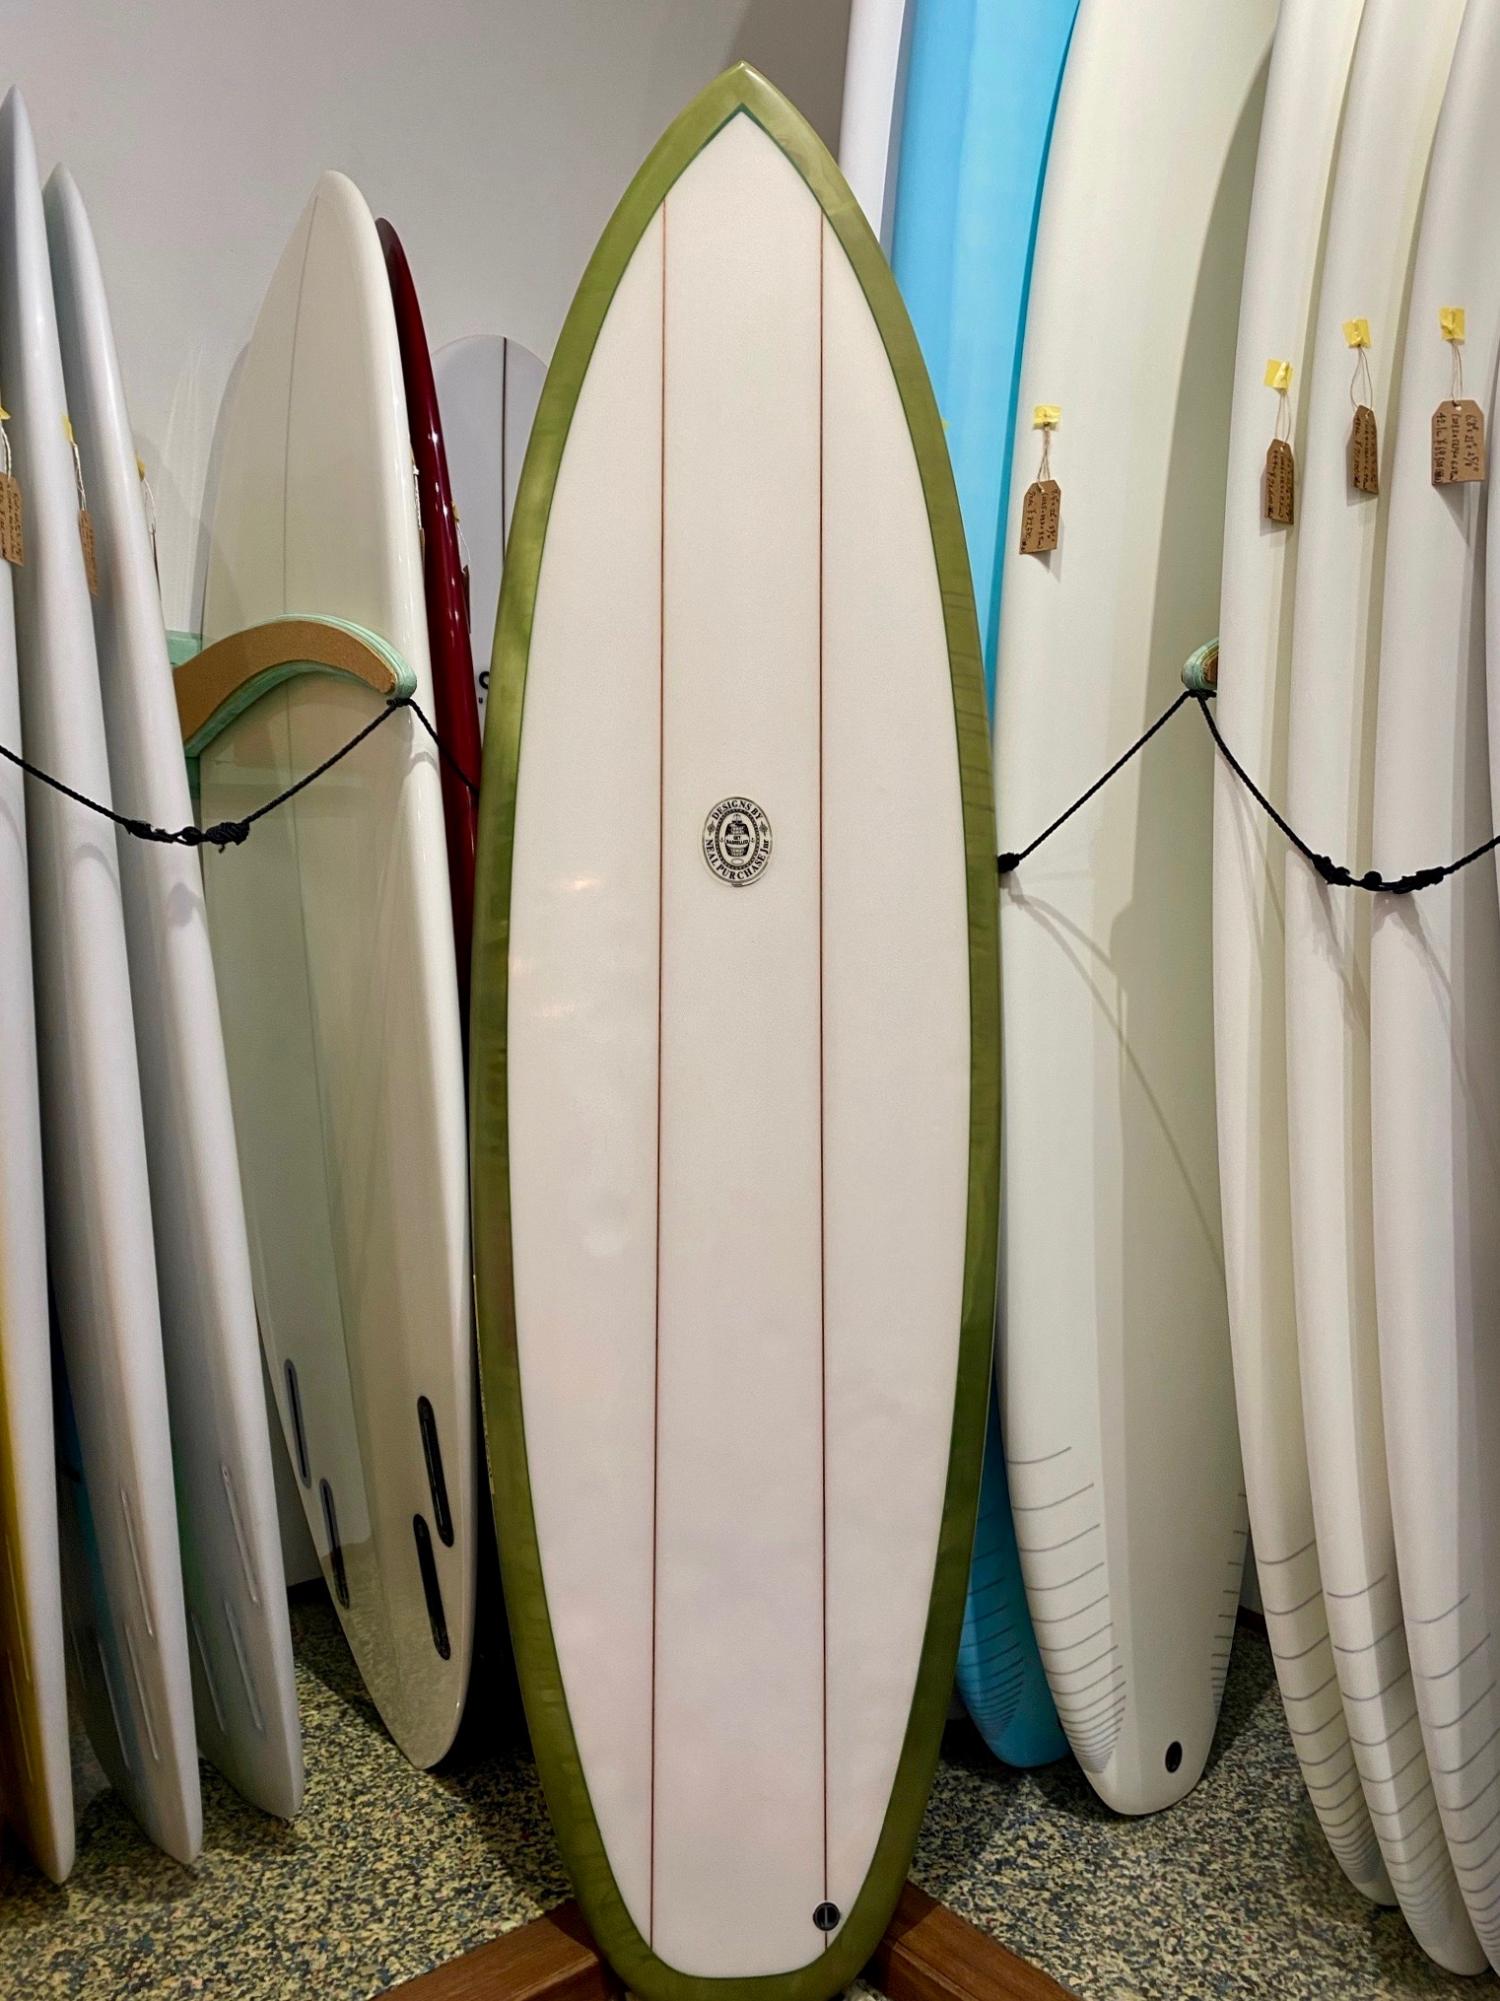 USED BOARDS DUO 6.0 [Neal Purchase Jnr Surfboards]　